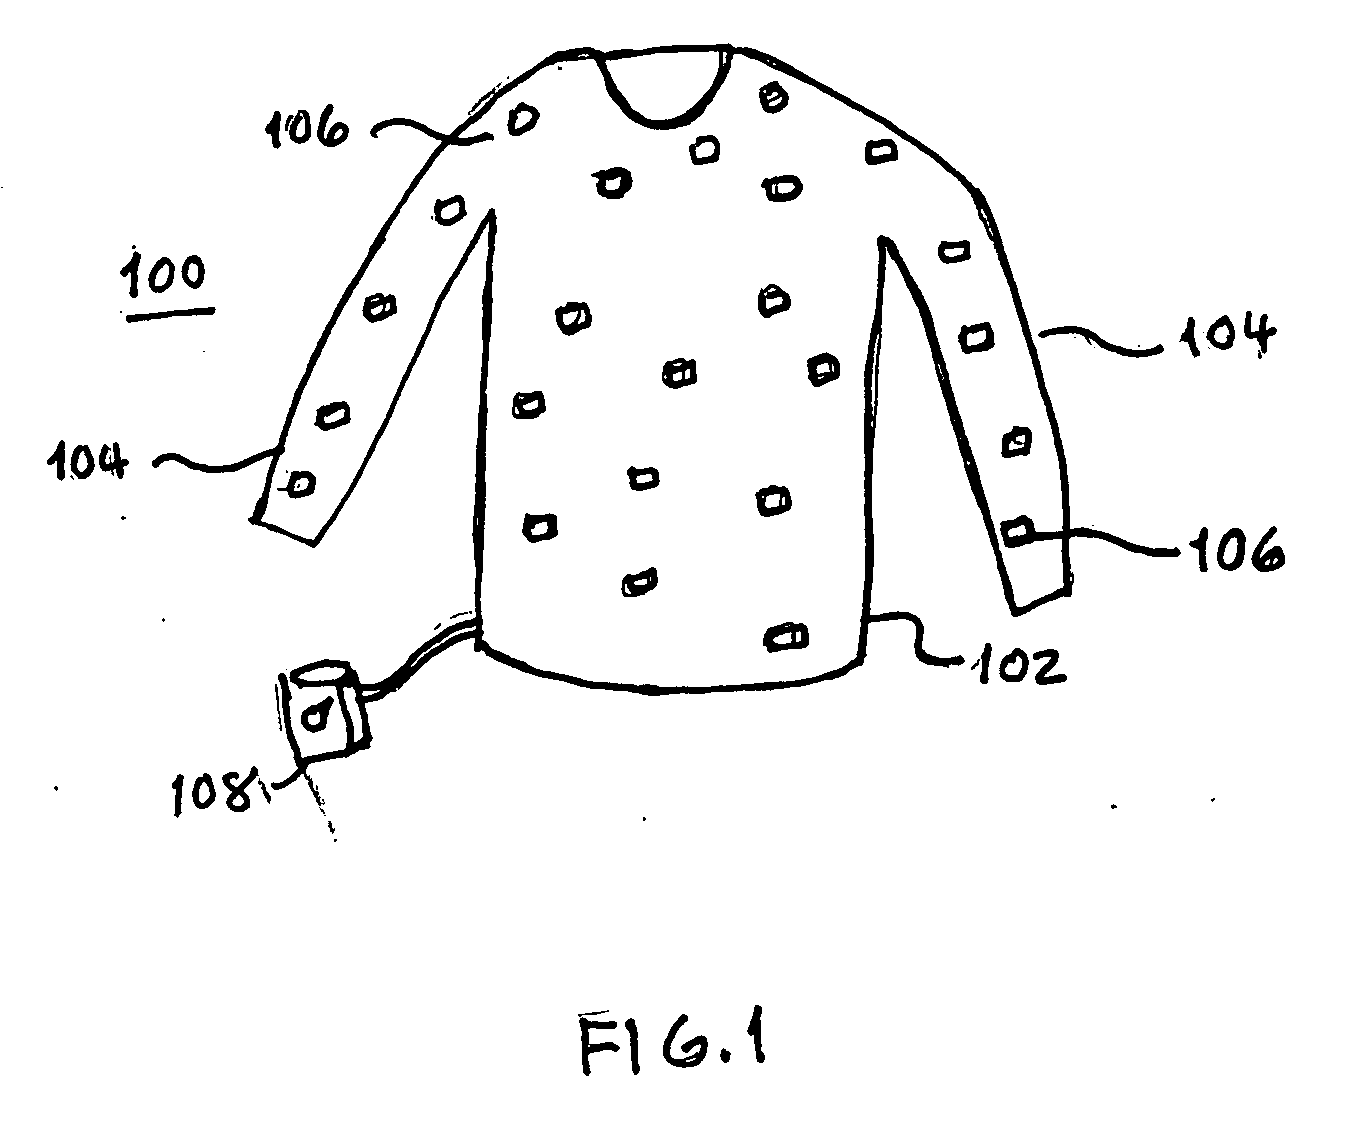 Garment for electrical muscle stimulation of muscles in the upper body and arms and legs